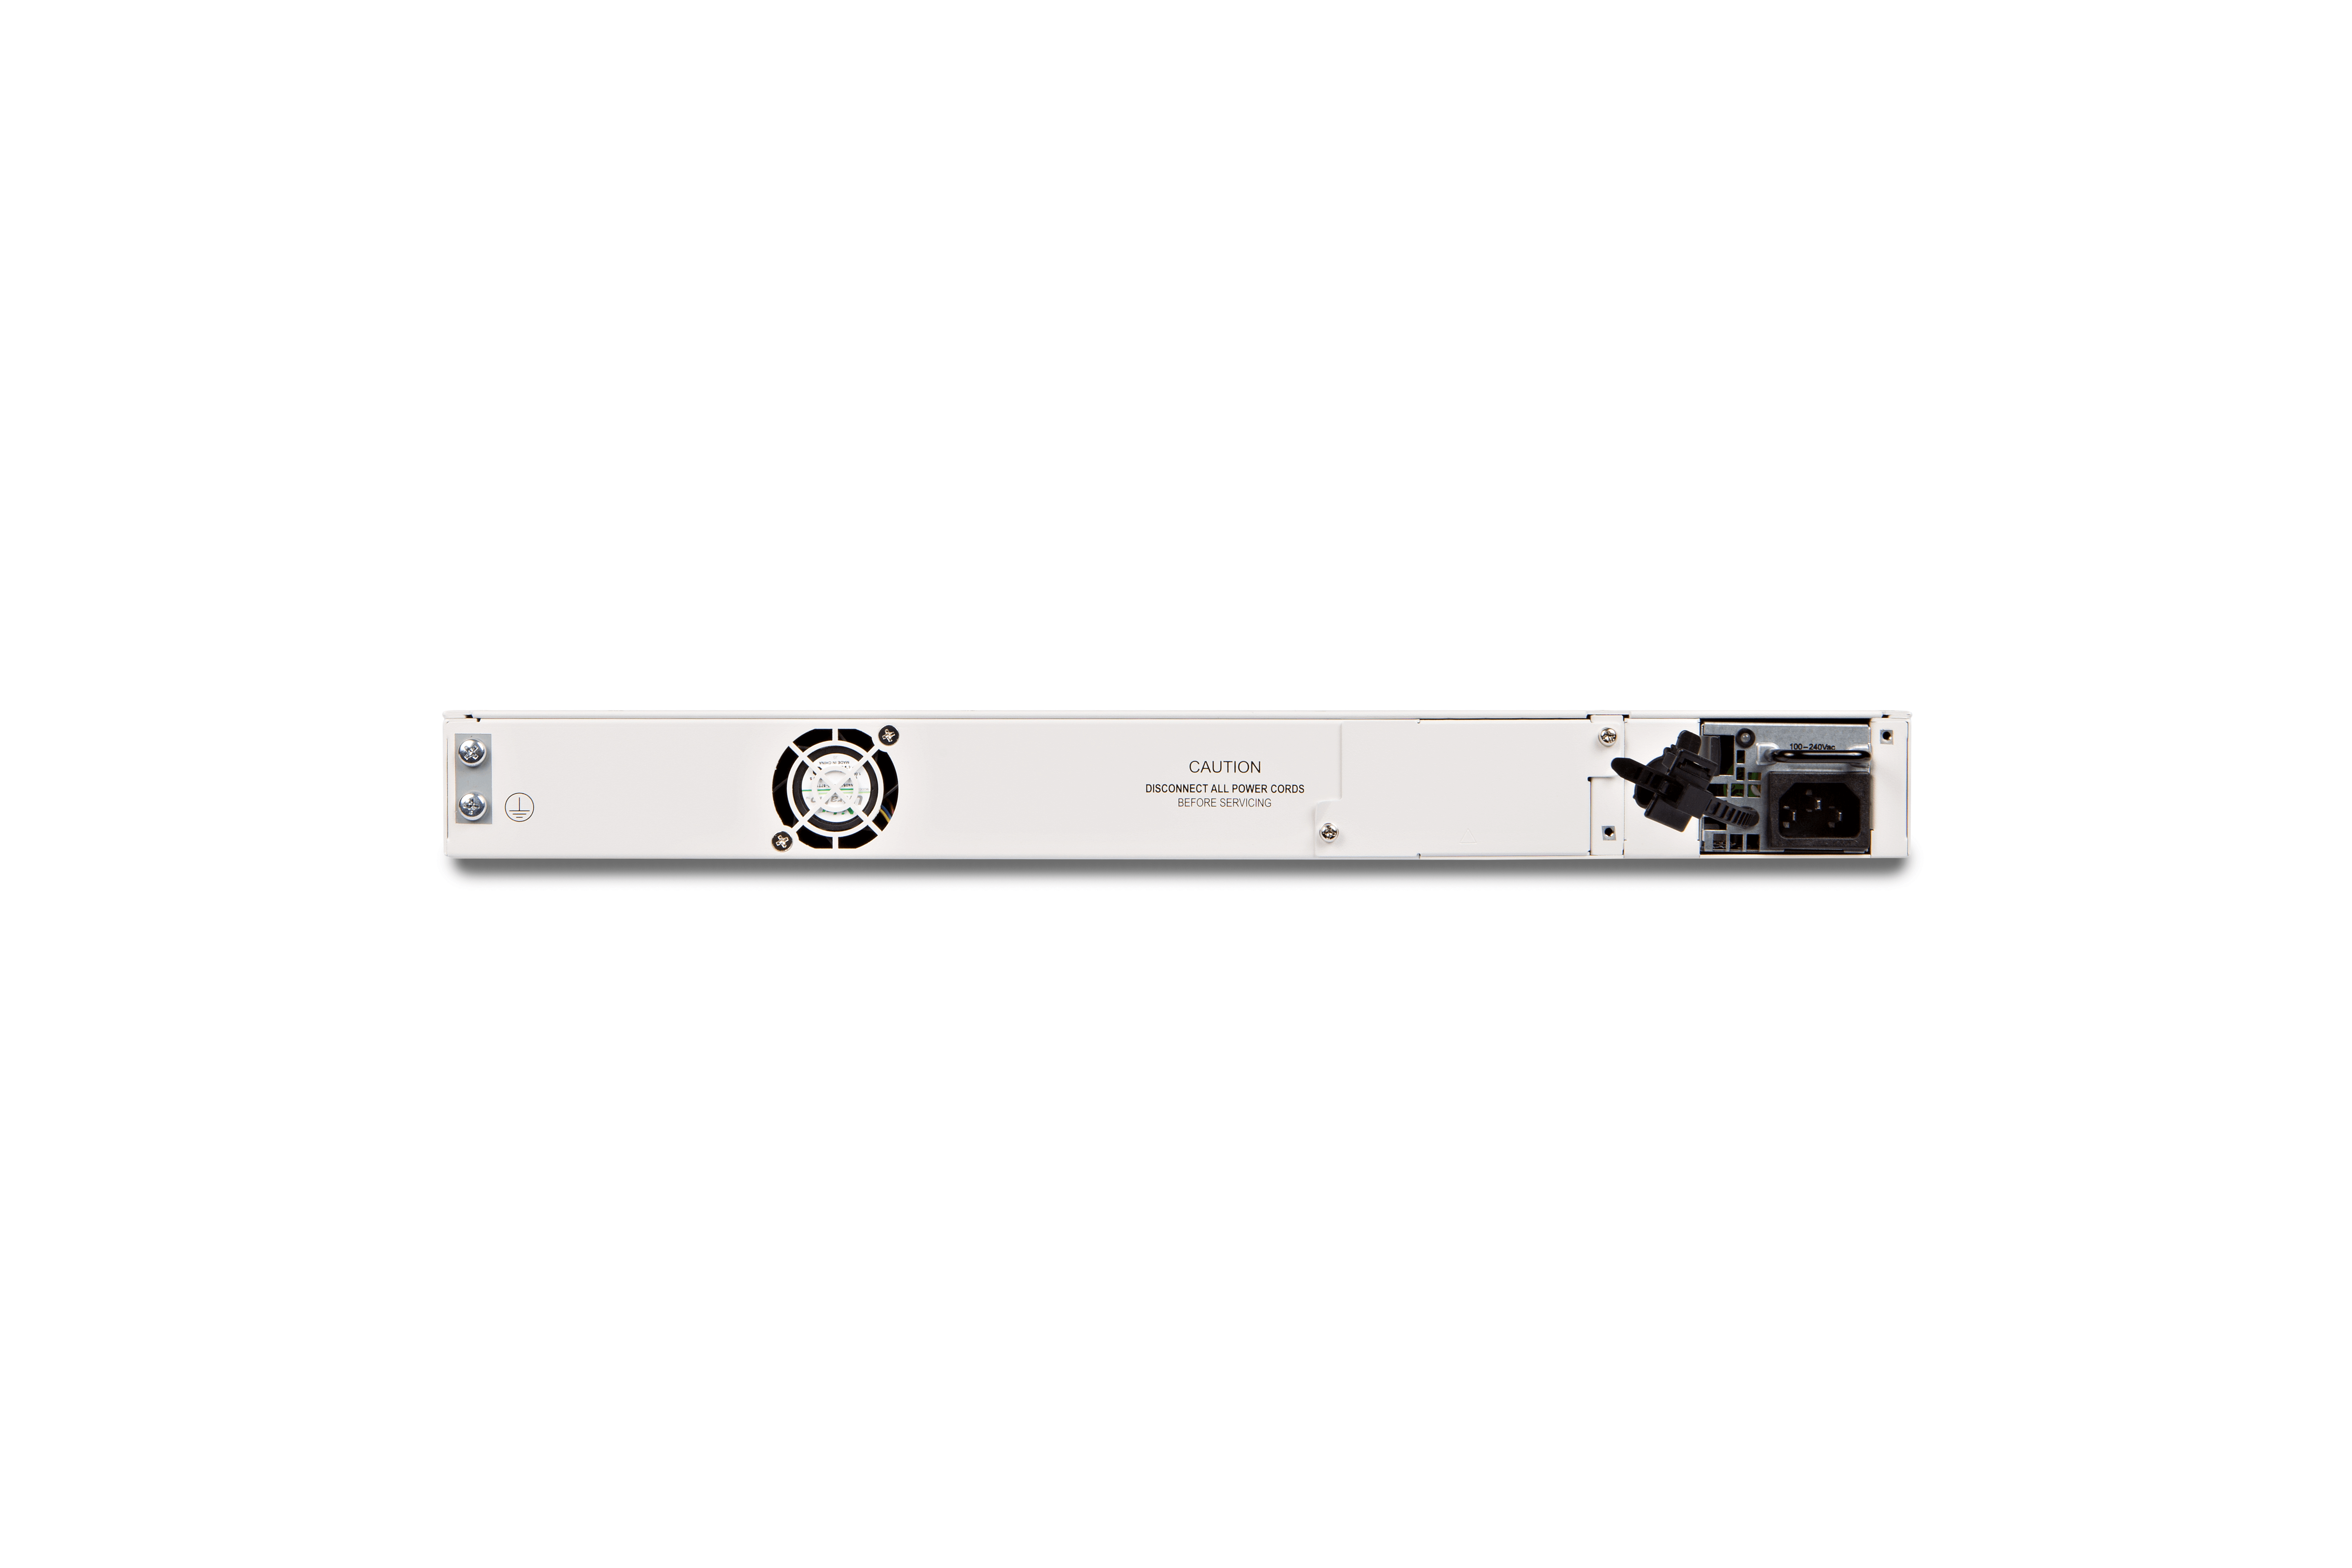 Fortinet FortiSwitch-548D-FPOE